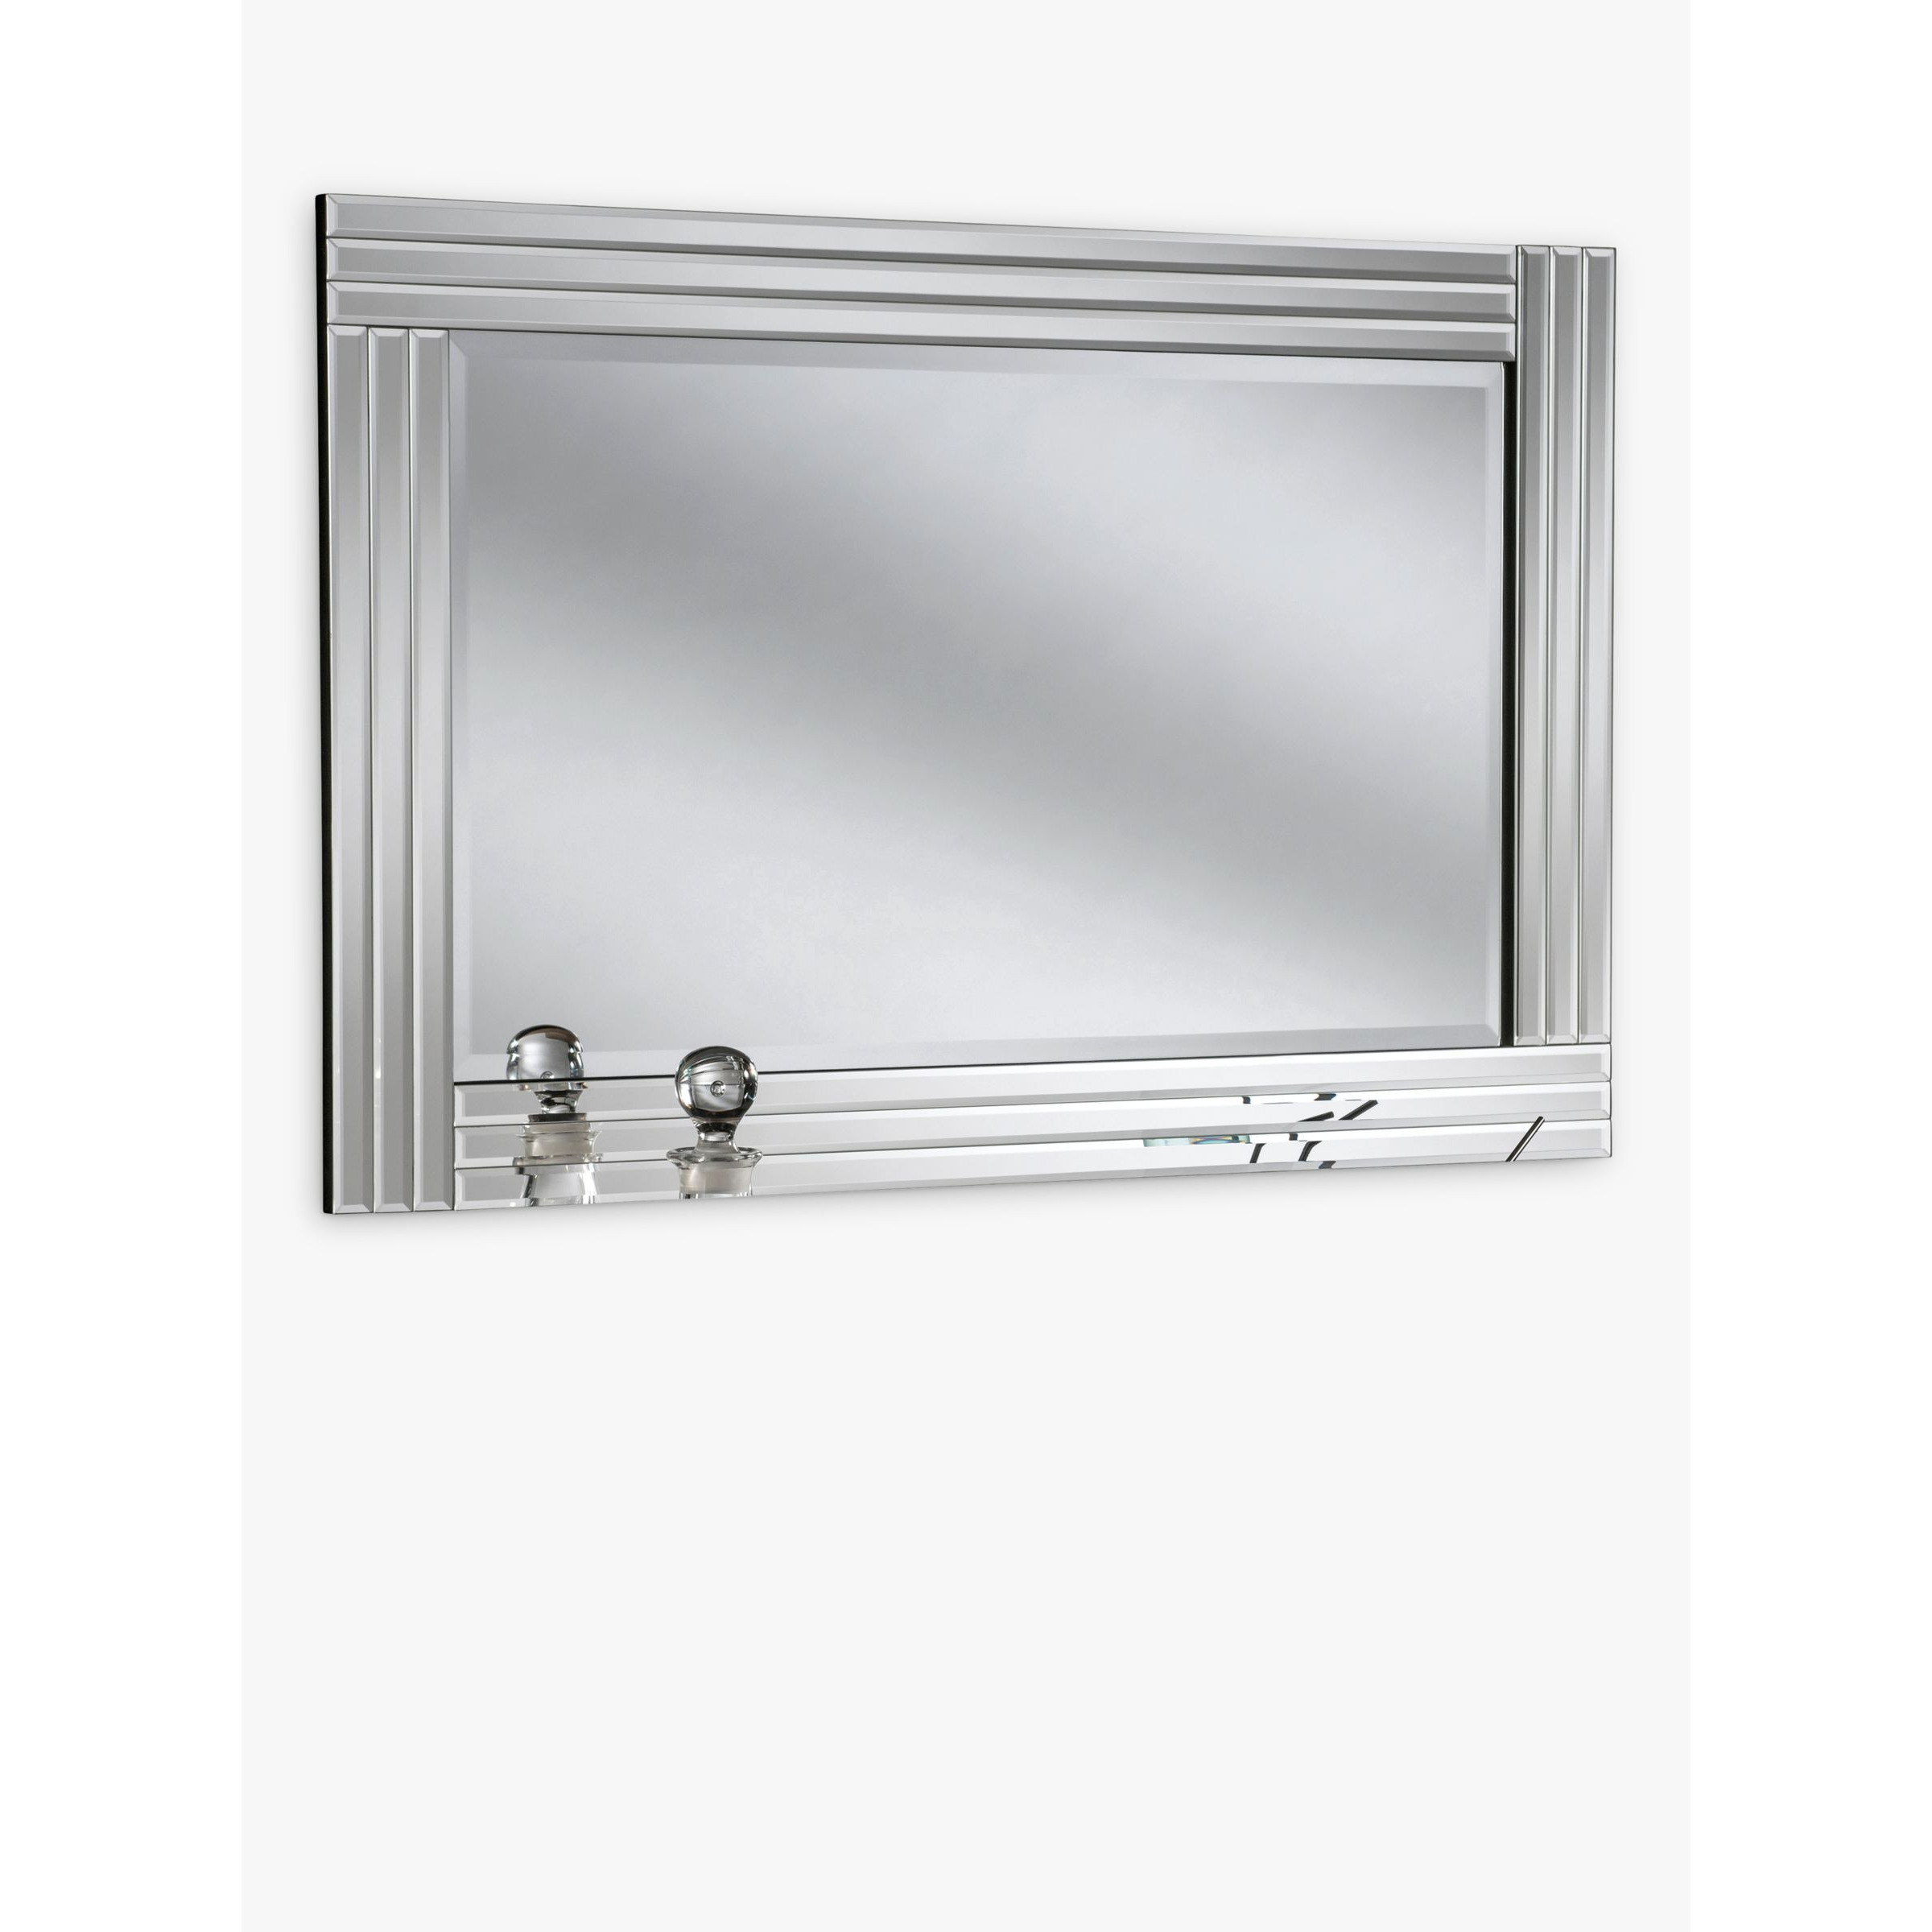 Yearn Bevelled Glass Rows Rectangular Frame Wall Mirror, Clear/Black - image 1